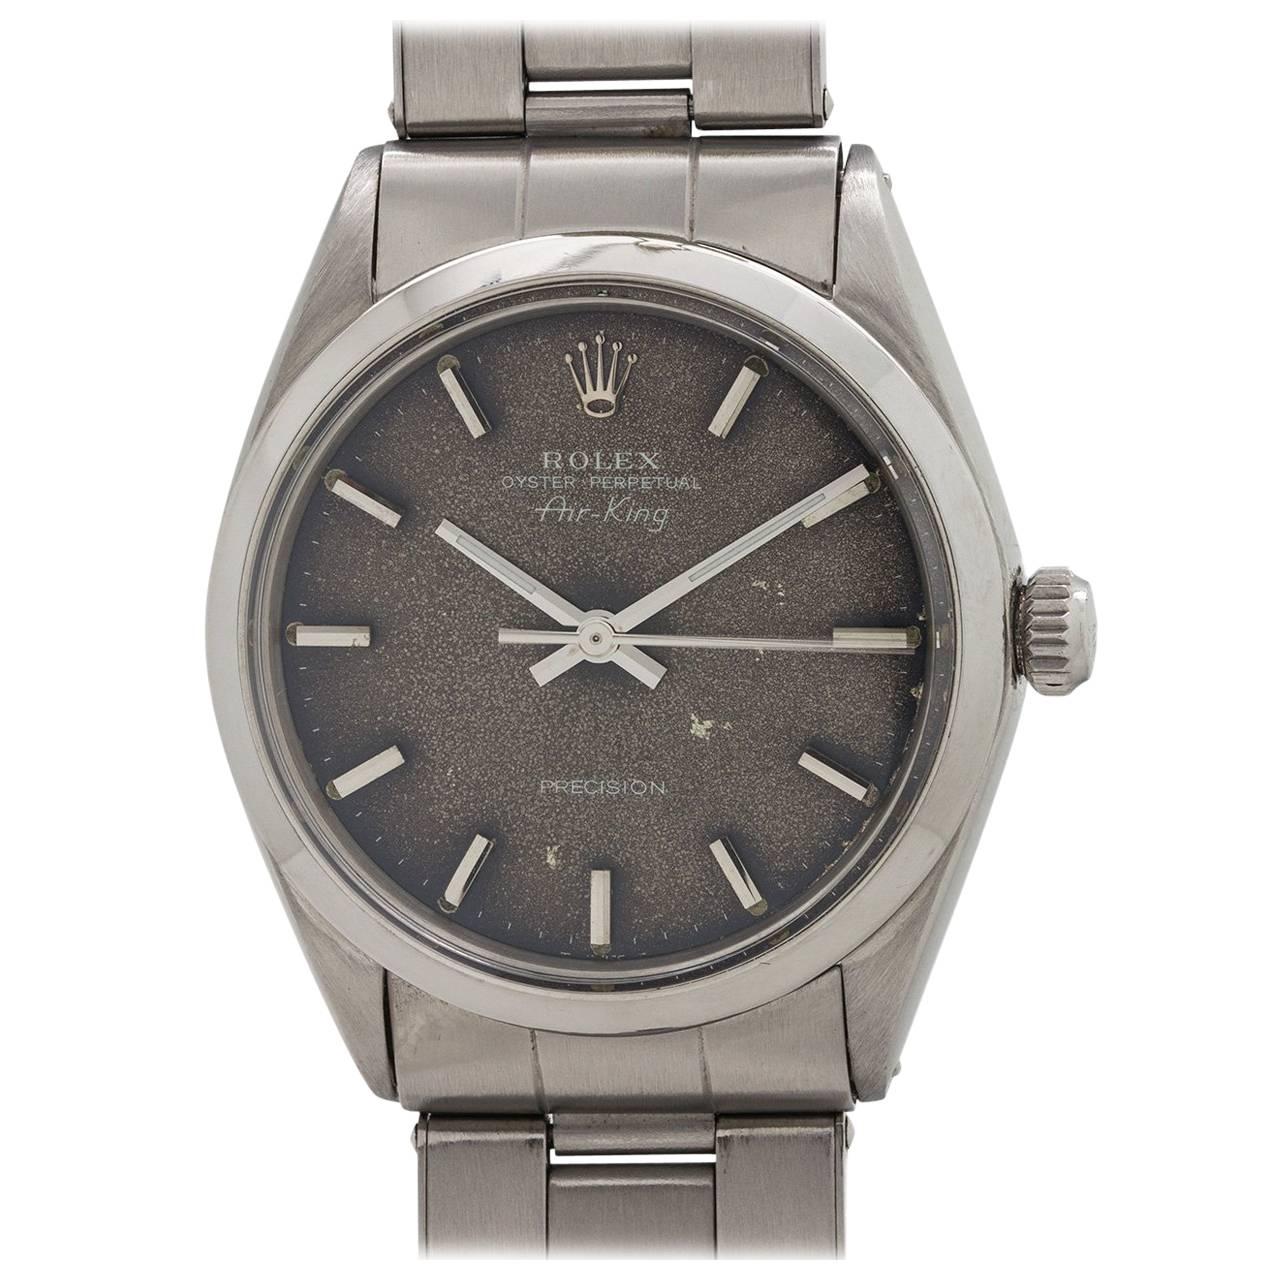 Rolex Stainless Steel Oyster Perpetual Tropical Dial Airking Wristwatch